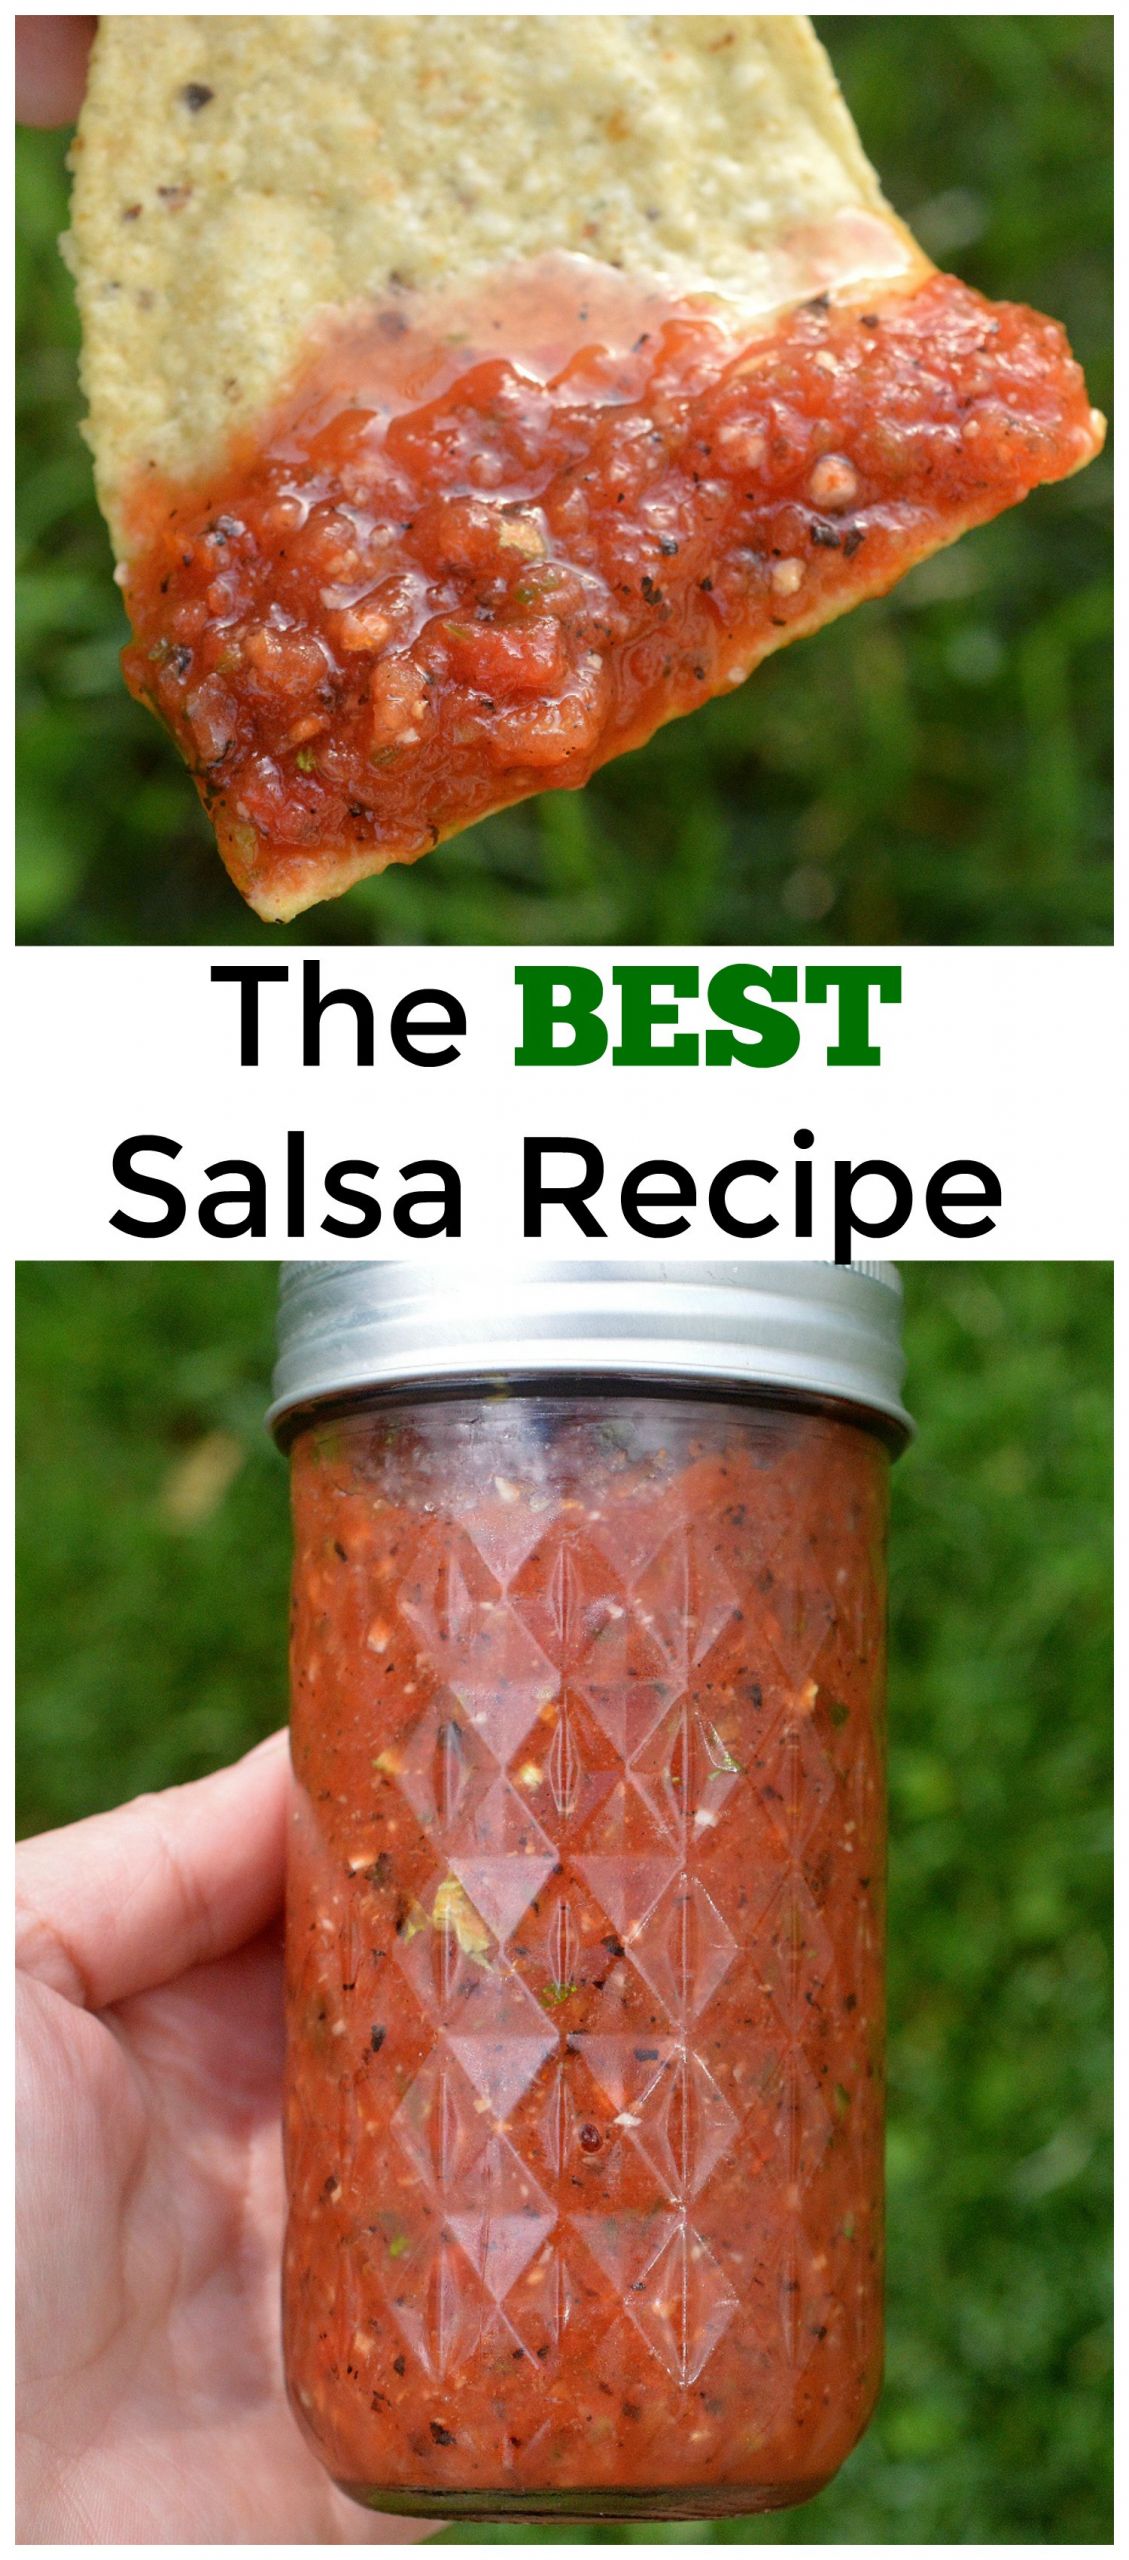 Best Salsa Recipe For Canning
 The BEST and Easiest Salsa Recipe